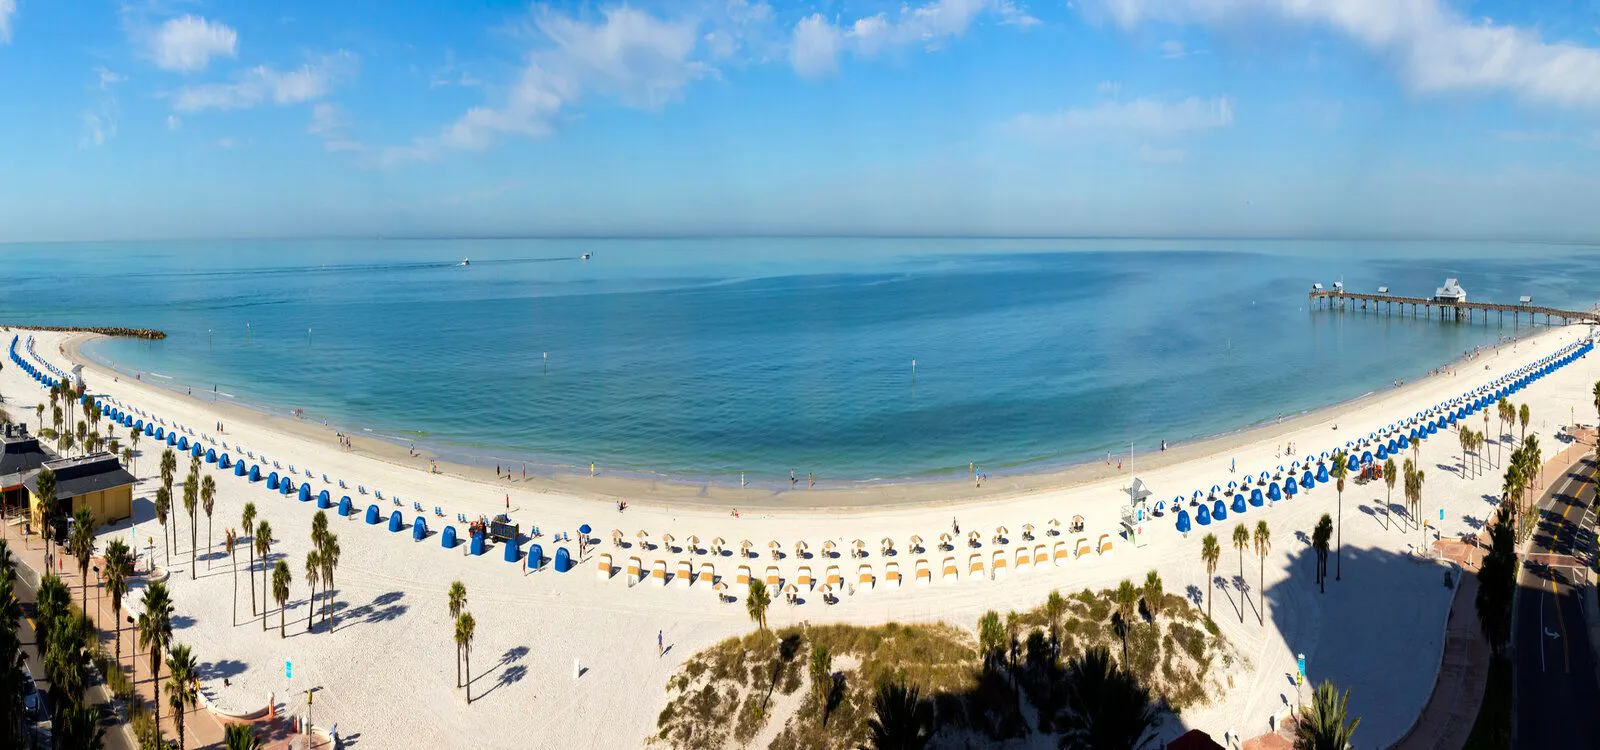 Aerial view of Clearwater Beach, a Gulf coast resort in Florida